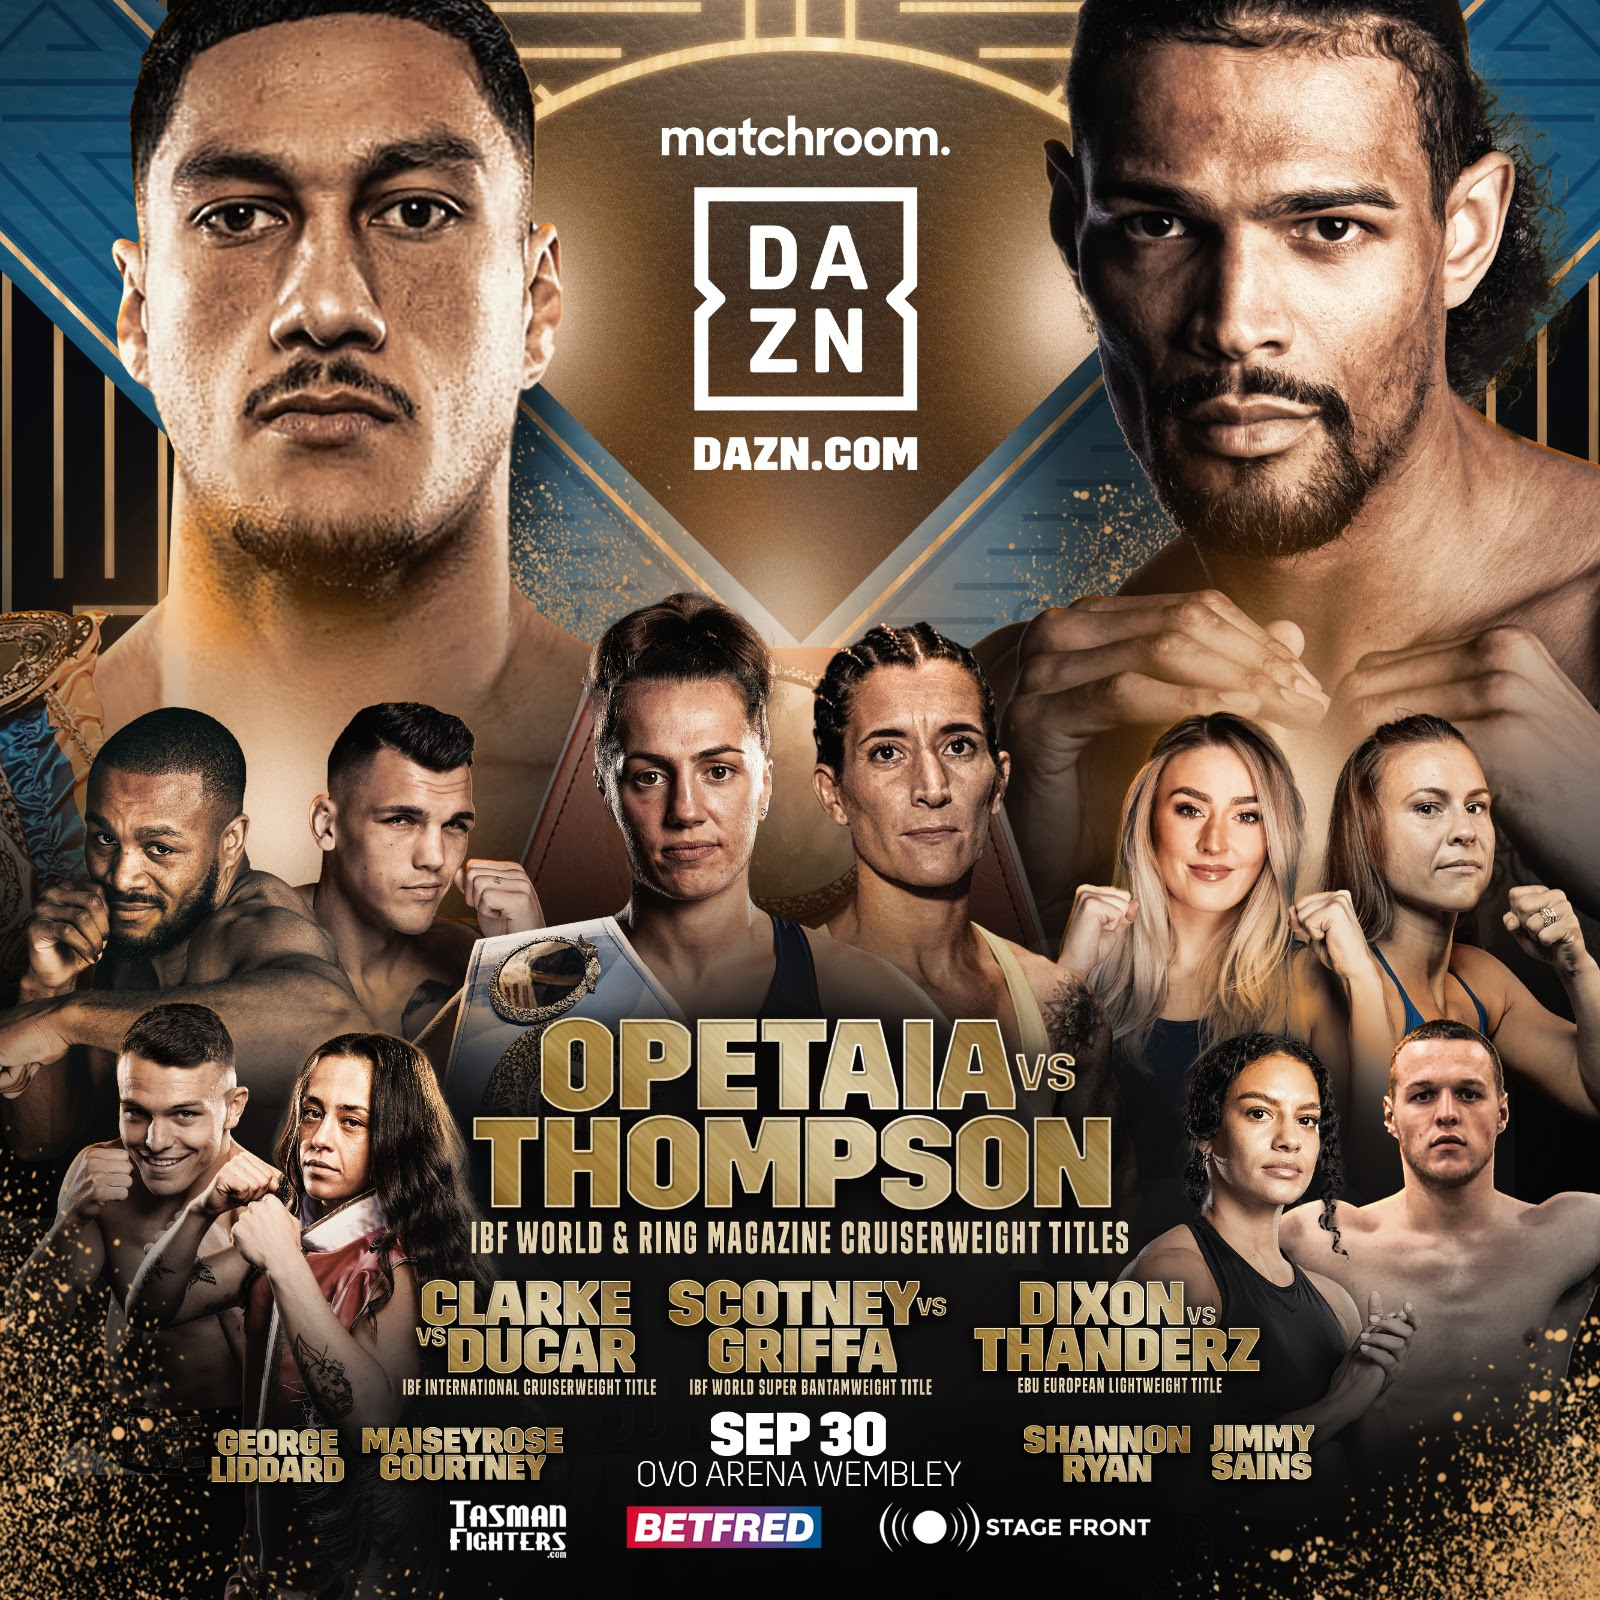 Opetaia-Thompson, Scotney-Griffa Title Fight Double Set, September 30 At OVO Arena Wembley